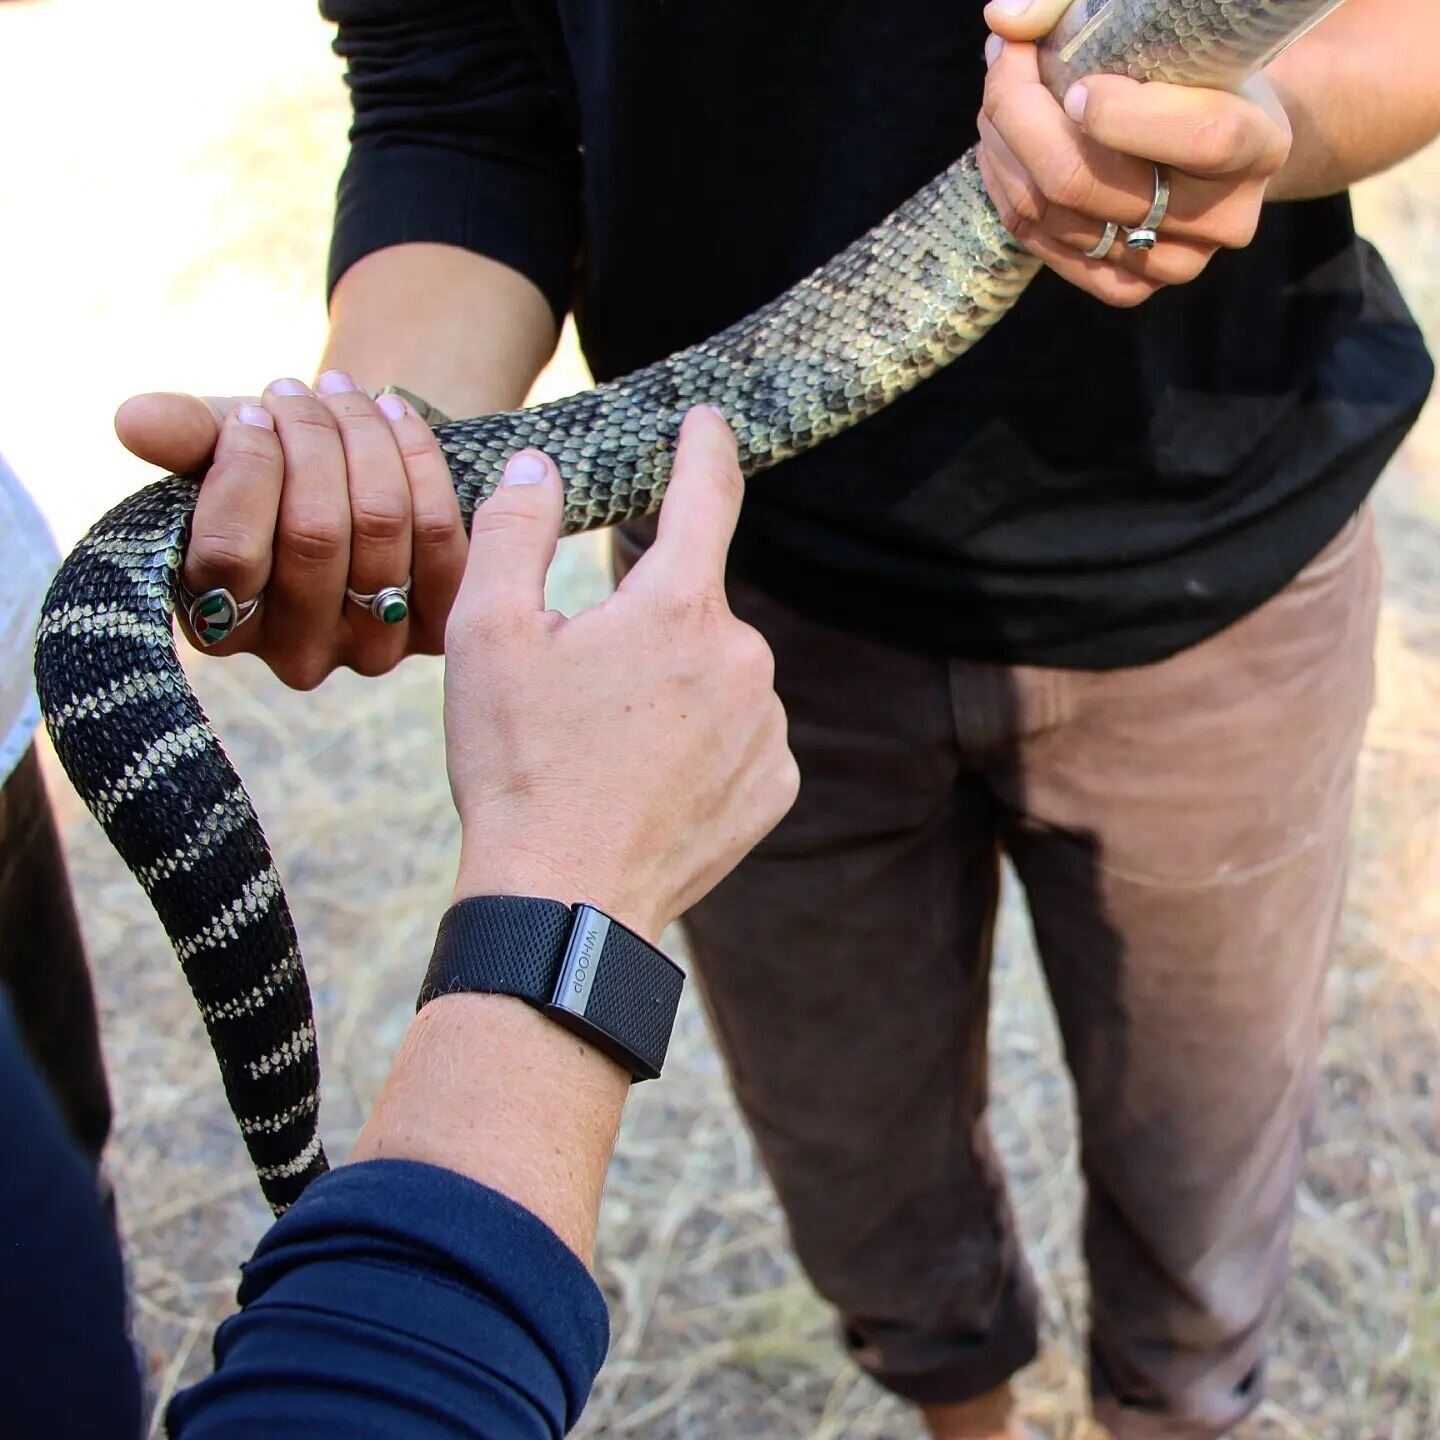 Our ecology tour of the Methow continued with a hands-on lesson about rattlesnakes! John Rohrer, biologist and snake enthusiast brought us male and female rattlesnakes to see up close. 

Did you know that they add segments to their rattle every time 